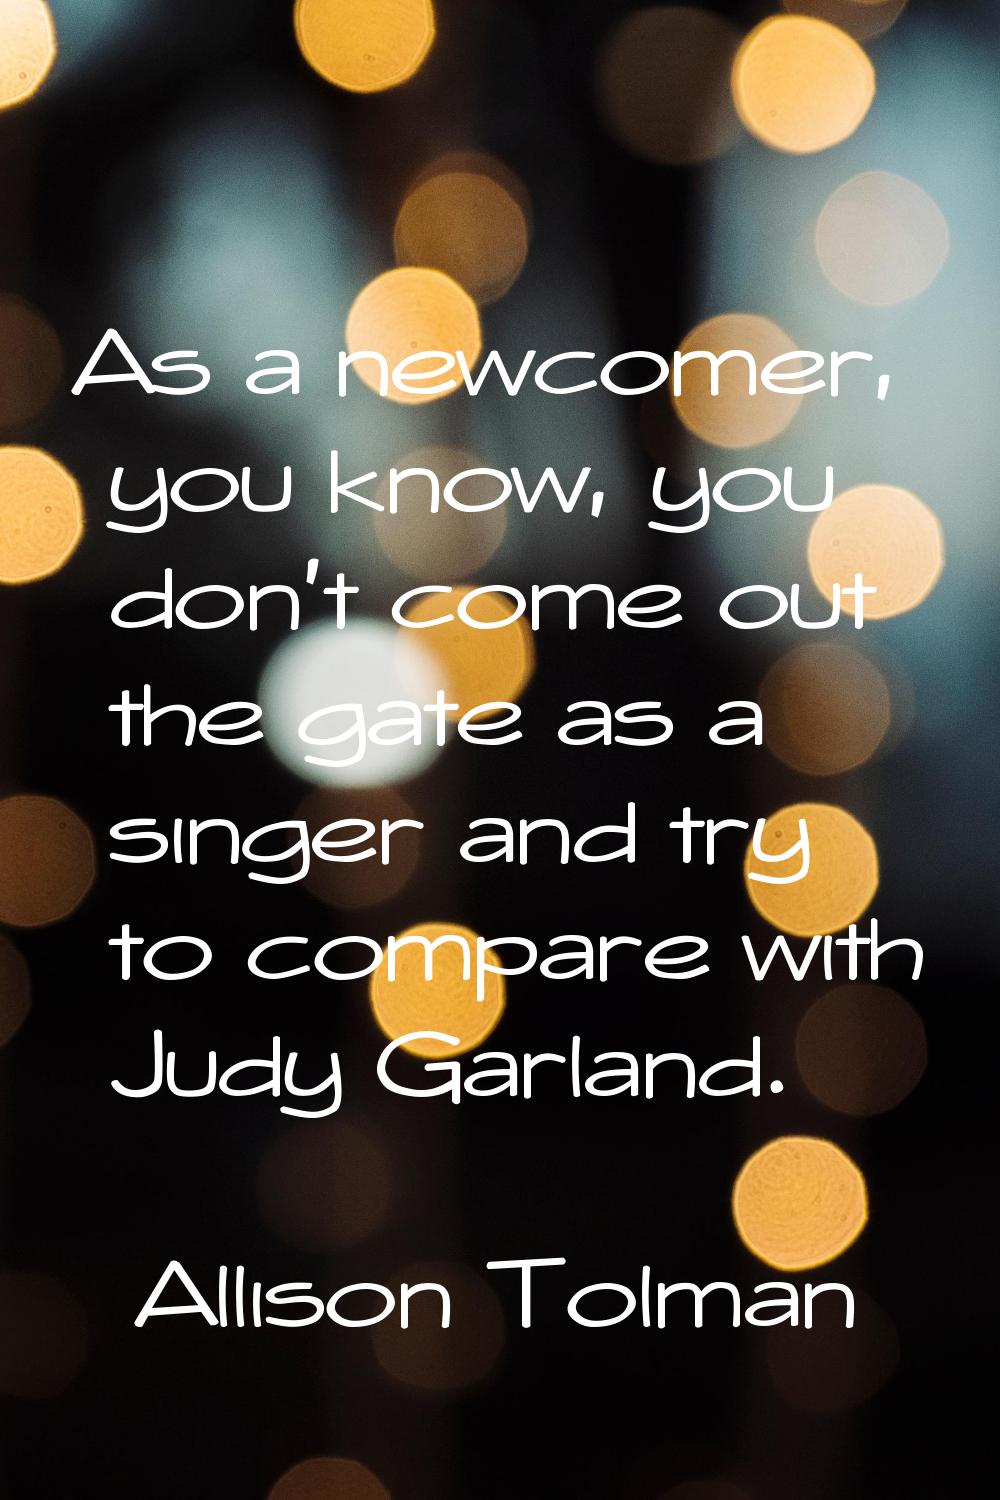 As a newcomer, you know, you don't come out the gate as a singer and try to compare with Judy Garla